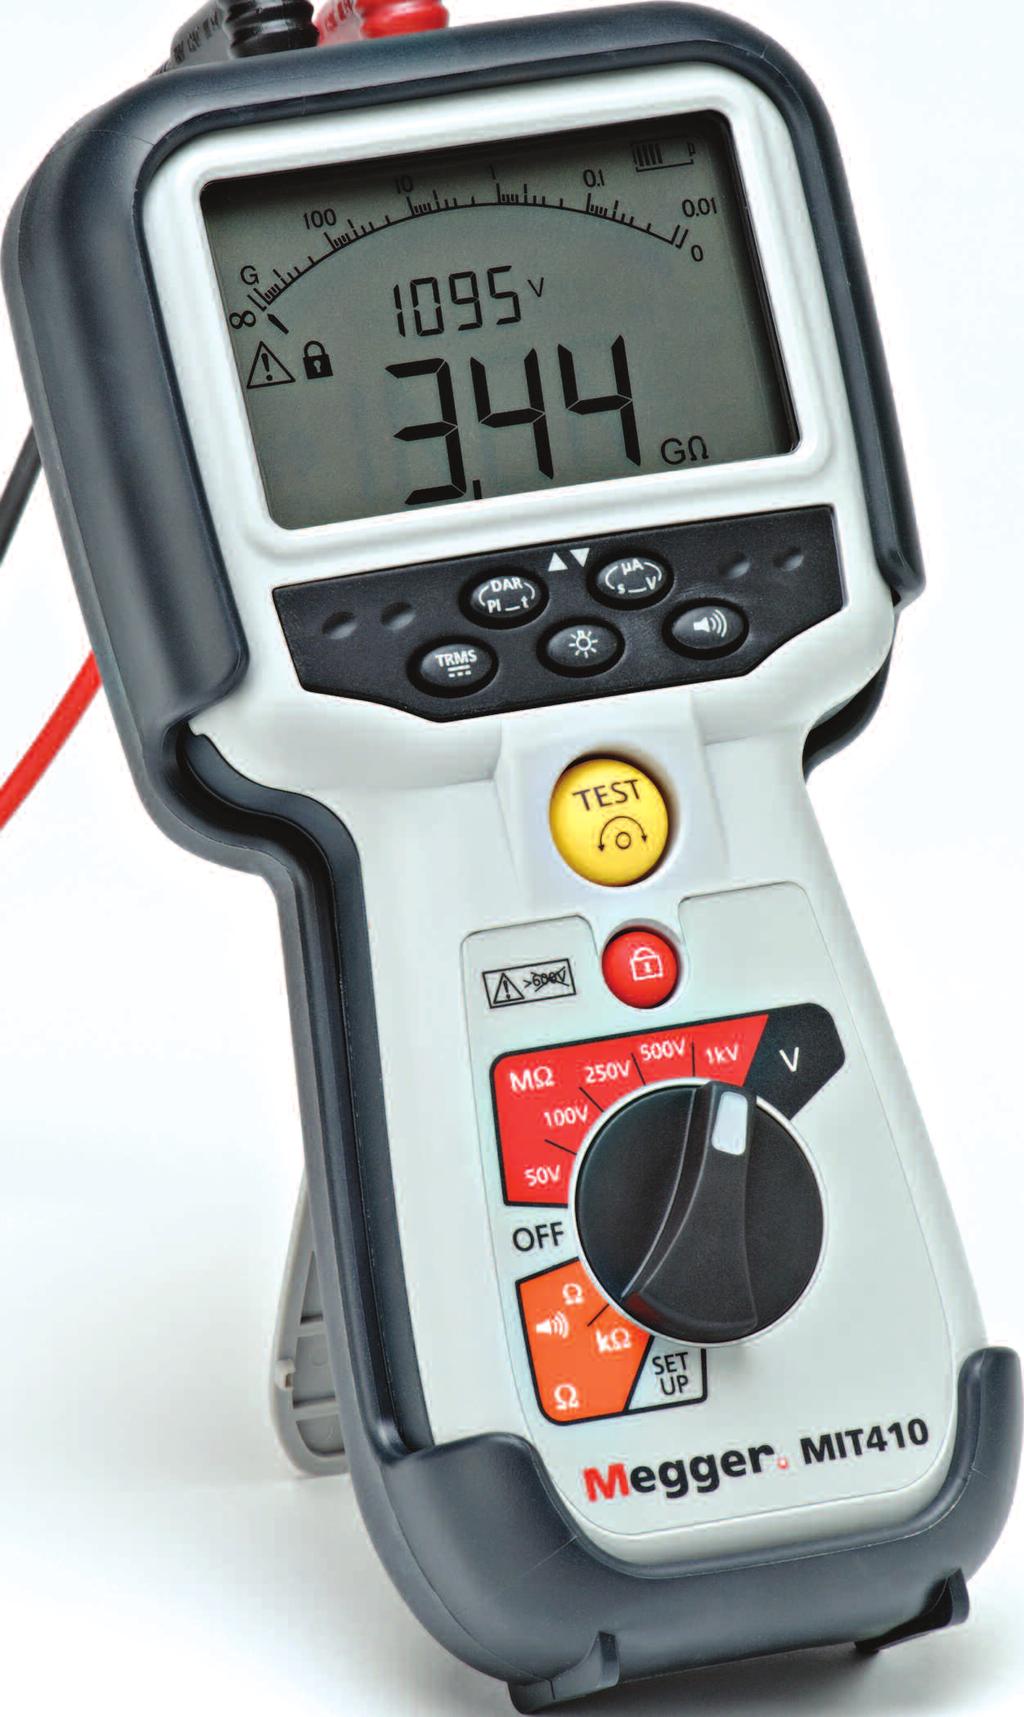 Insulation testing up to 1000 V and 200 GΩ Patented analog arc and dual digital display CAT IV 600 V rating TRMS & DC Voltage measurement Continuity testing at 200 ma or 20 ma down to 0.